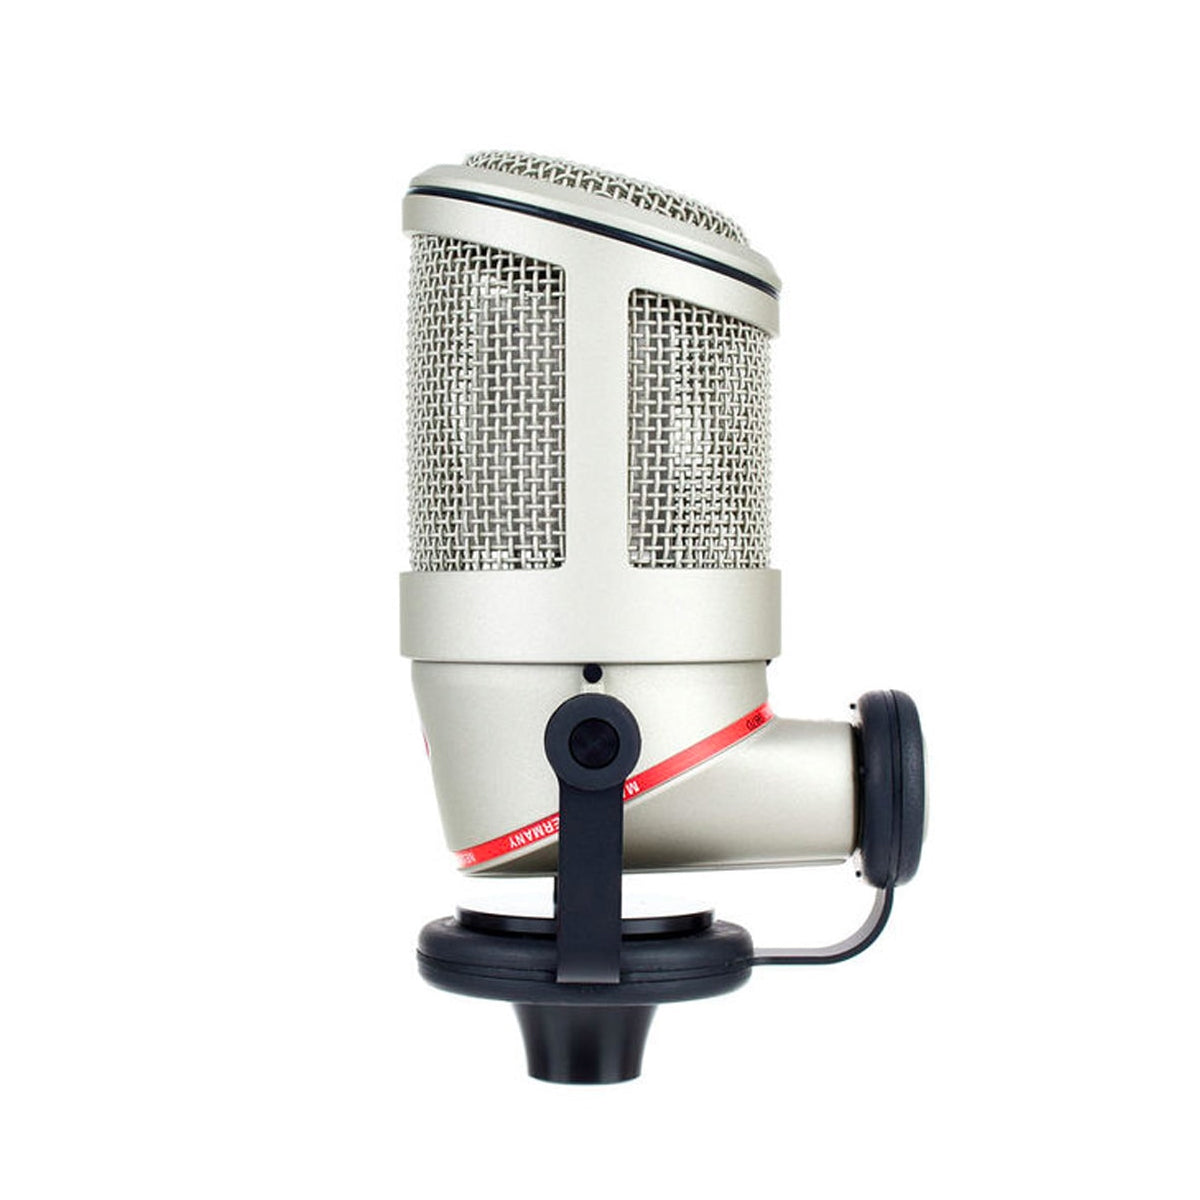 Neumann BCM 104 Broadcast Condenser Microphone, Cardioid Directional Characteristic